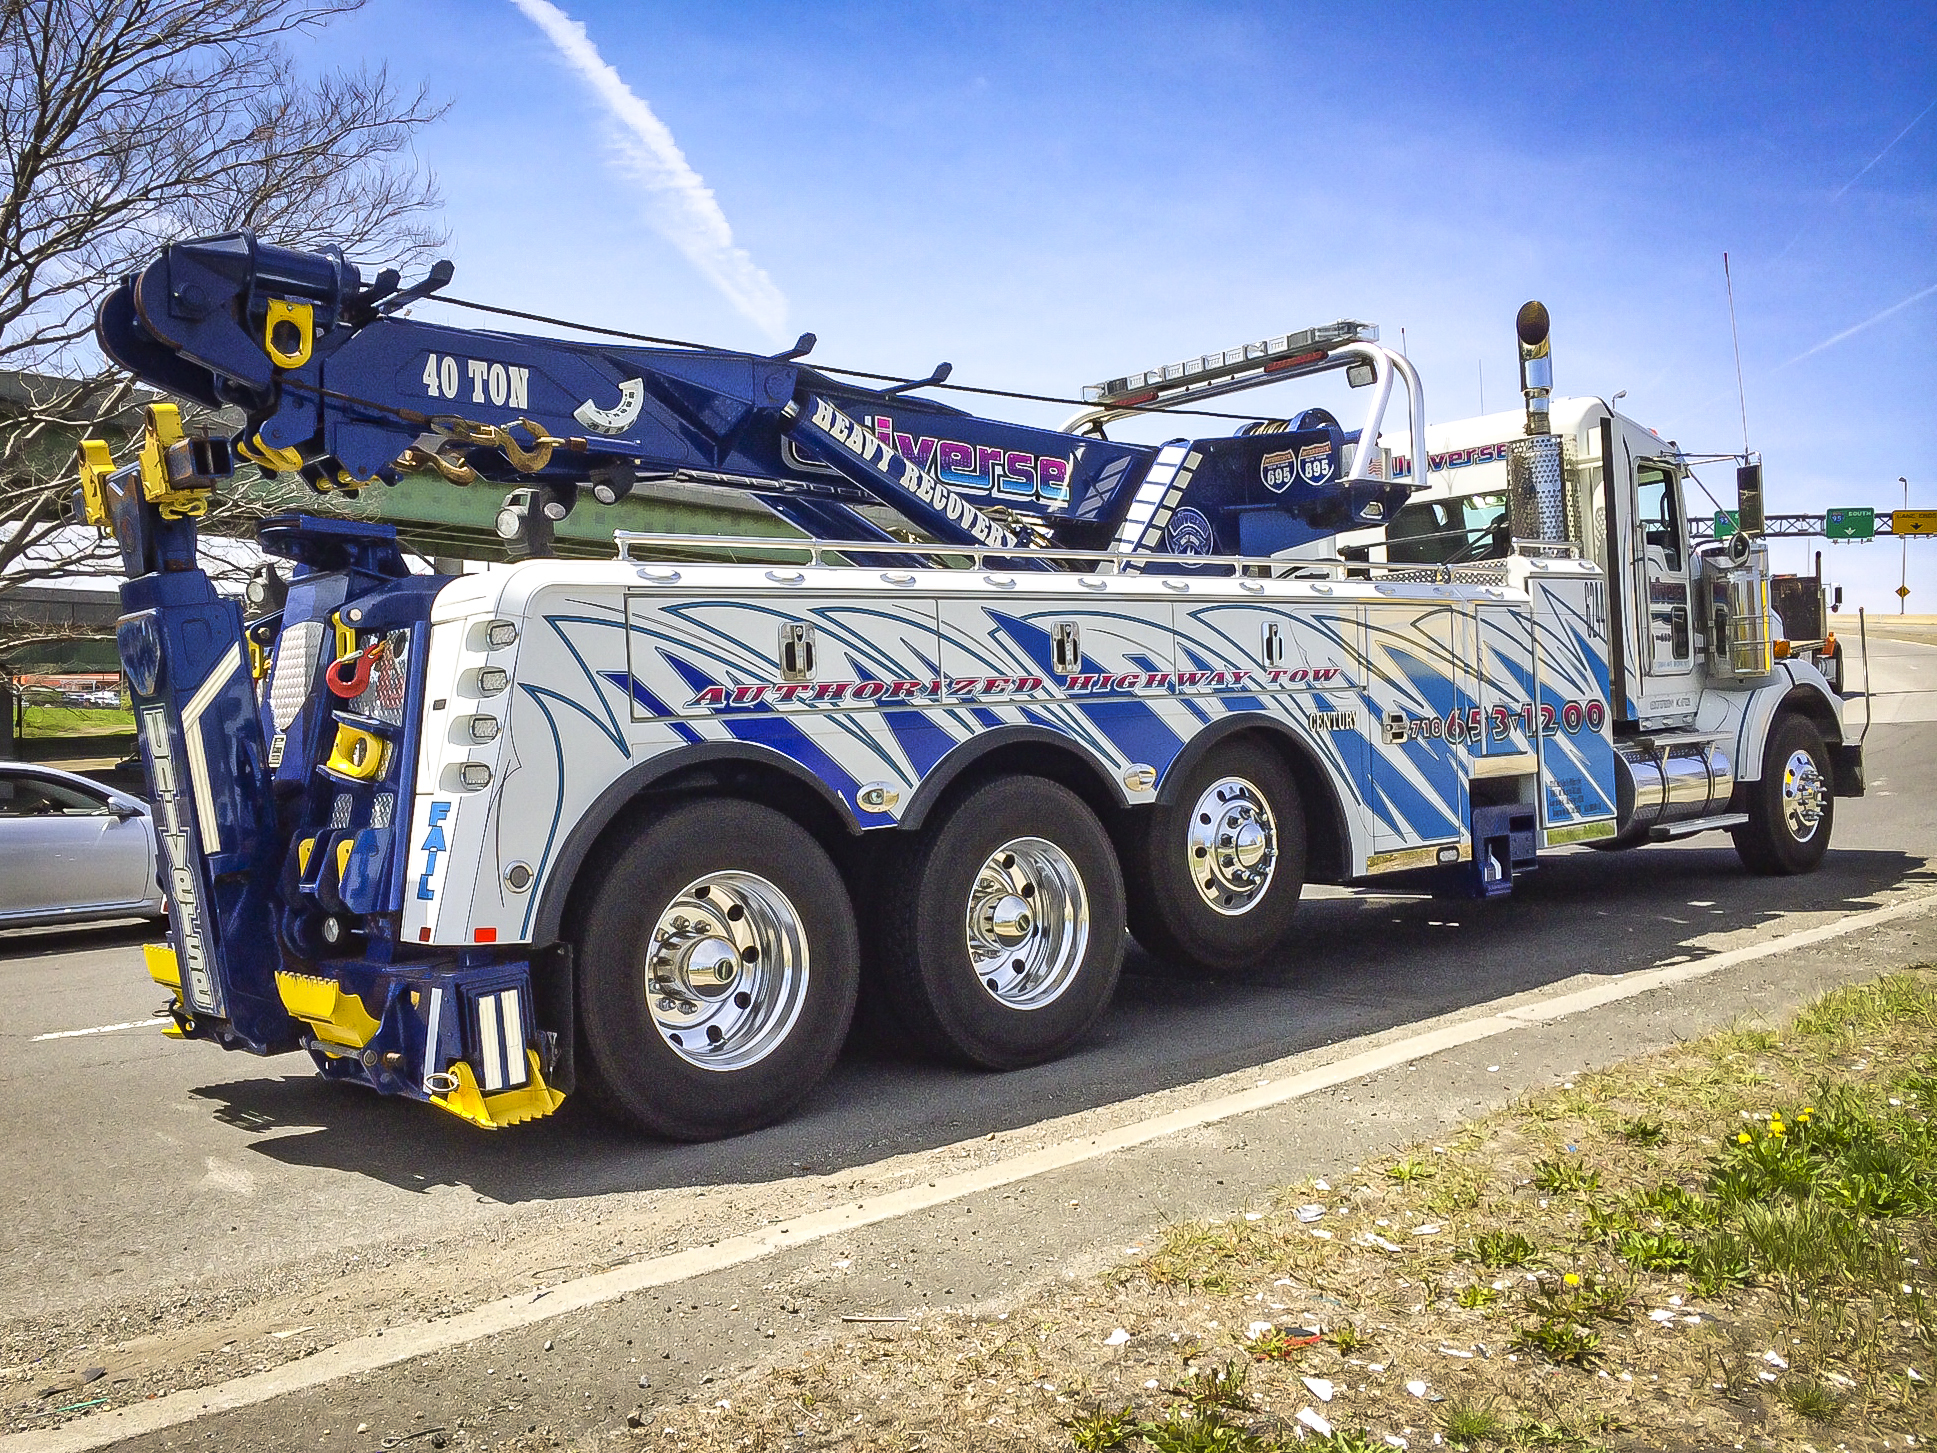 Century 1140 40 ton rotator for Universe Towing in Bronx NY